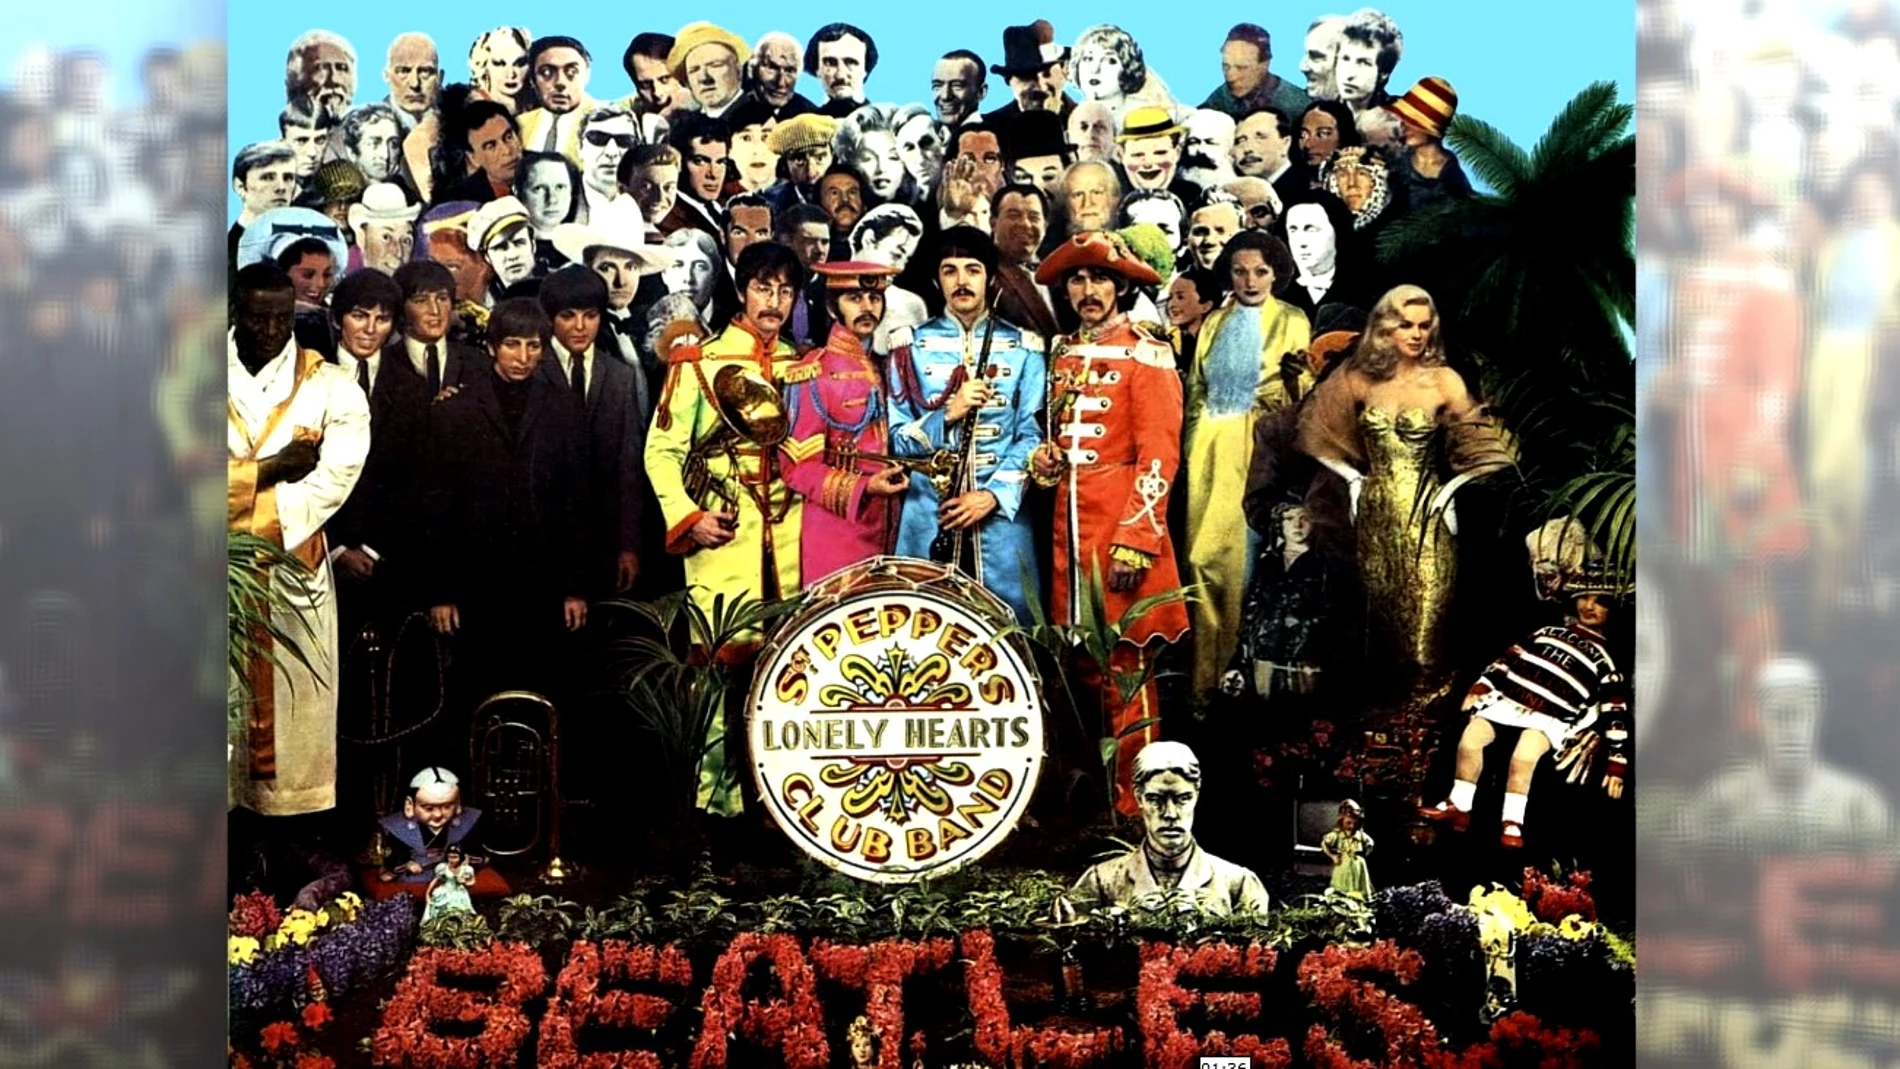 Sgt. Pepper Lonely Hearts Club Band